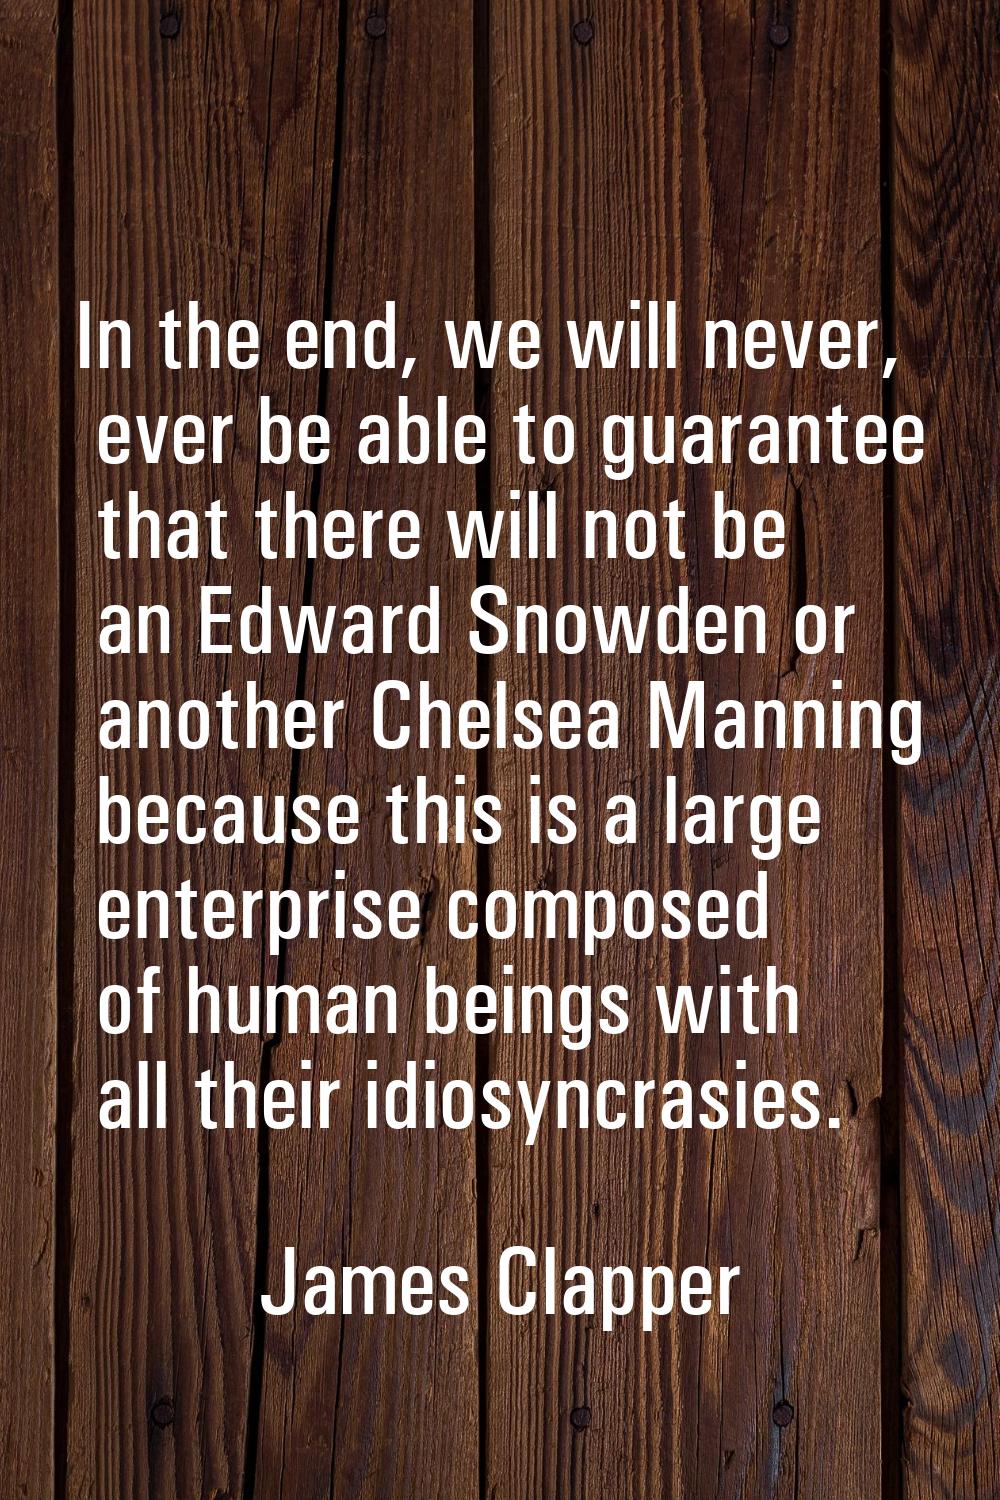 In the end, we will never, ever be able to guarantee that there will not be an Edward Snowden or an